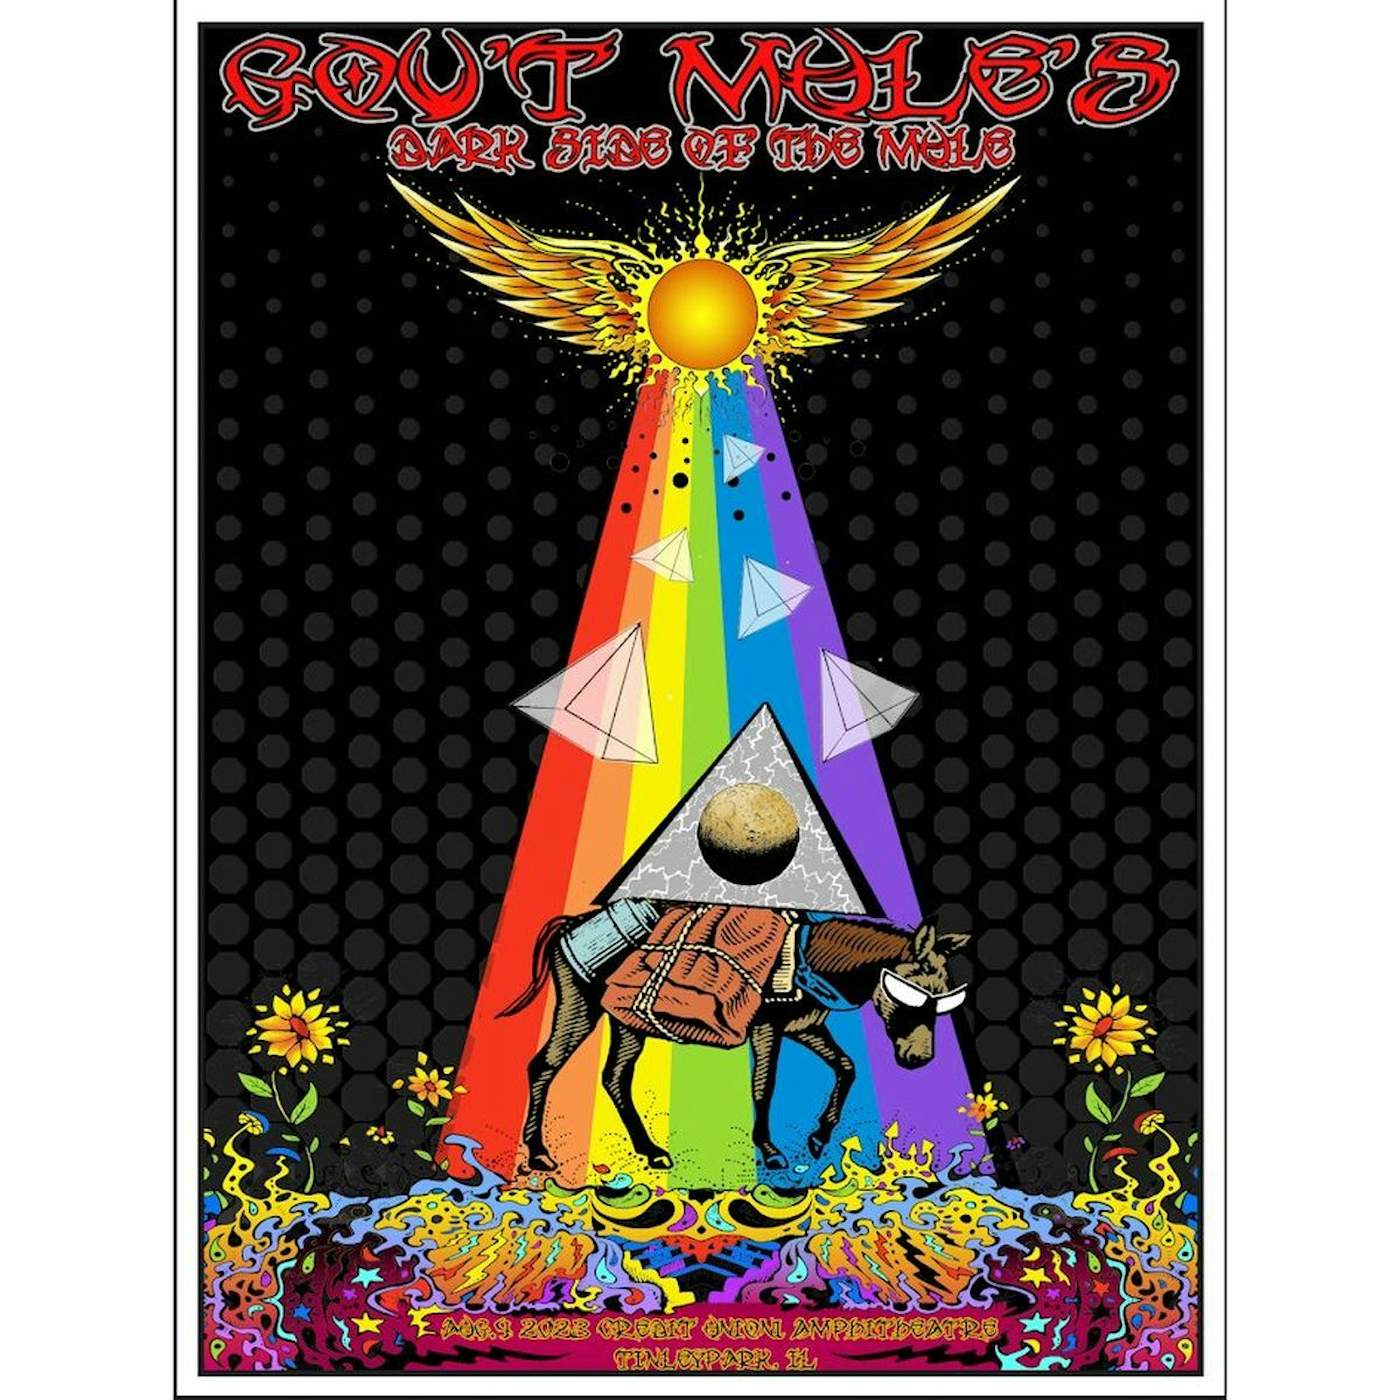 Gov't Mule Tinley Park, IL 2023 Poster by Mike Dubois